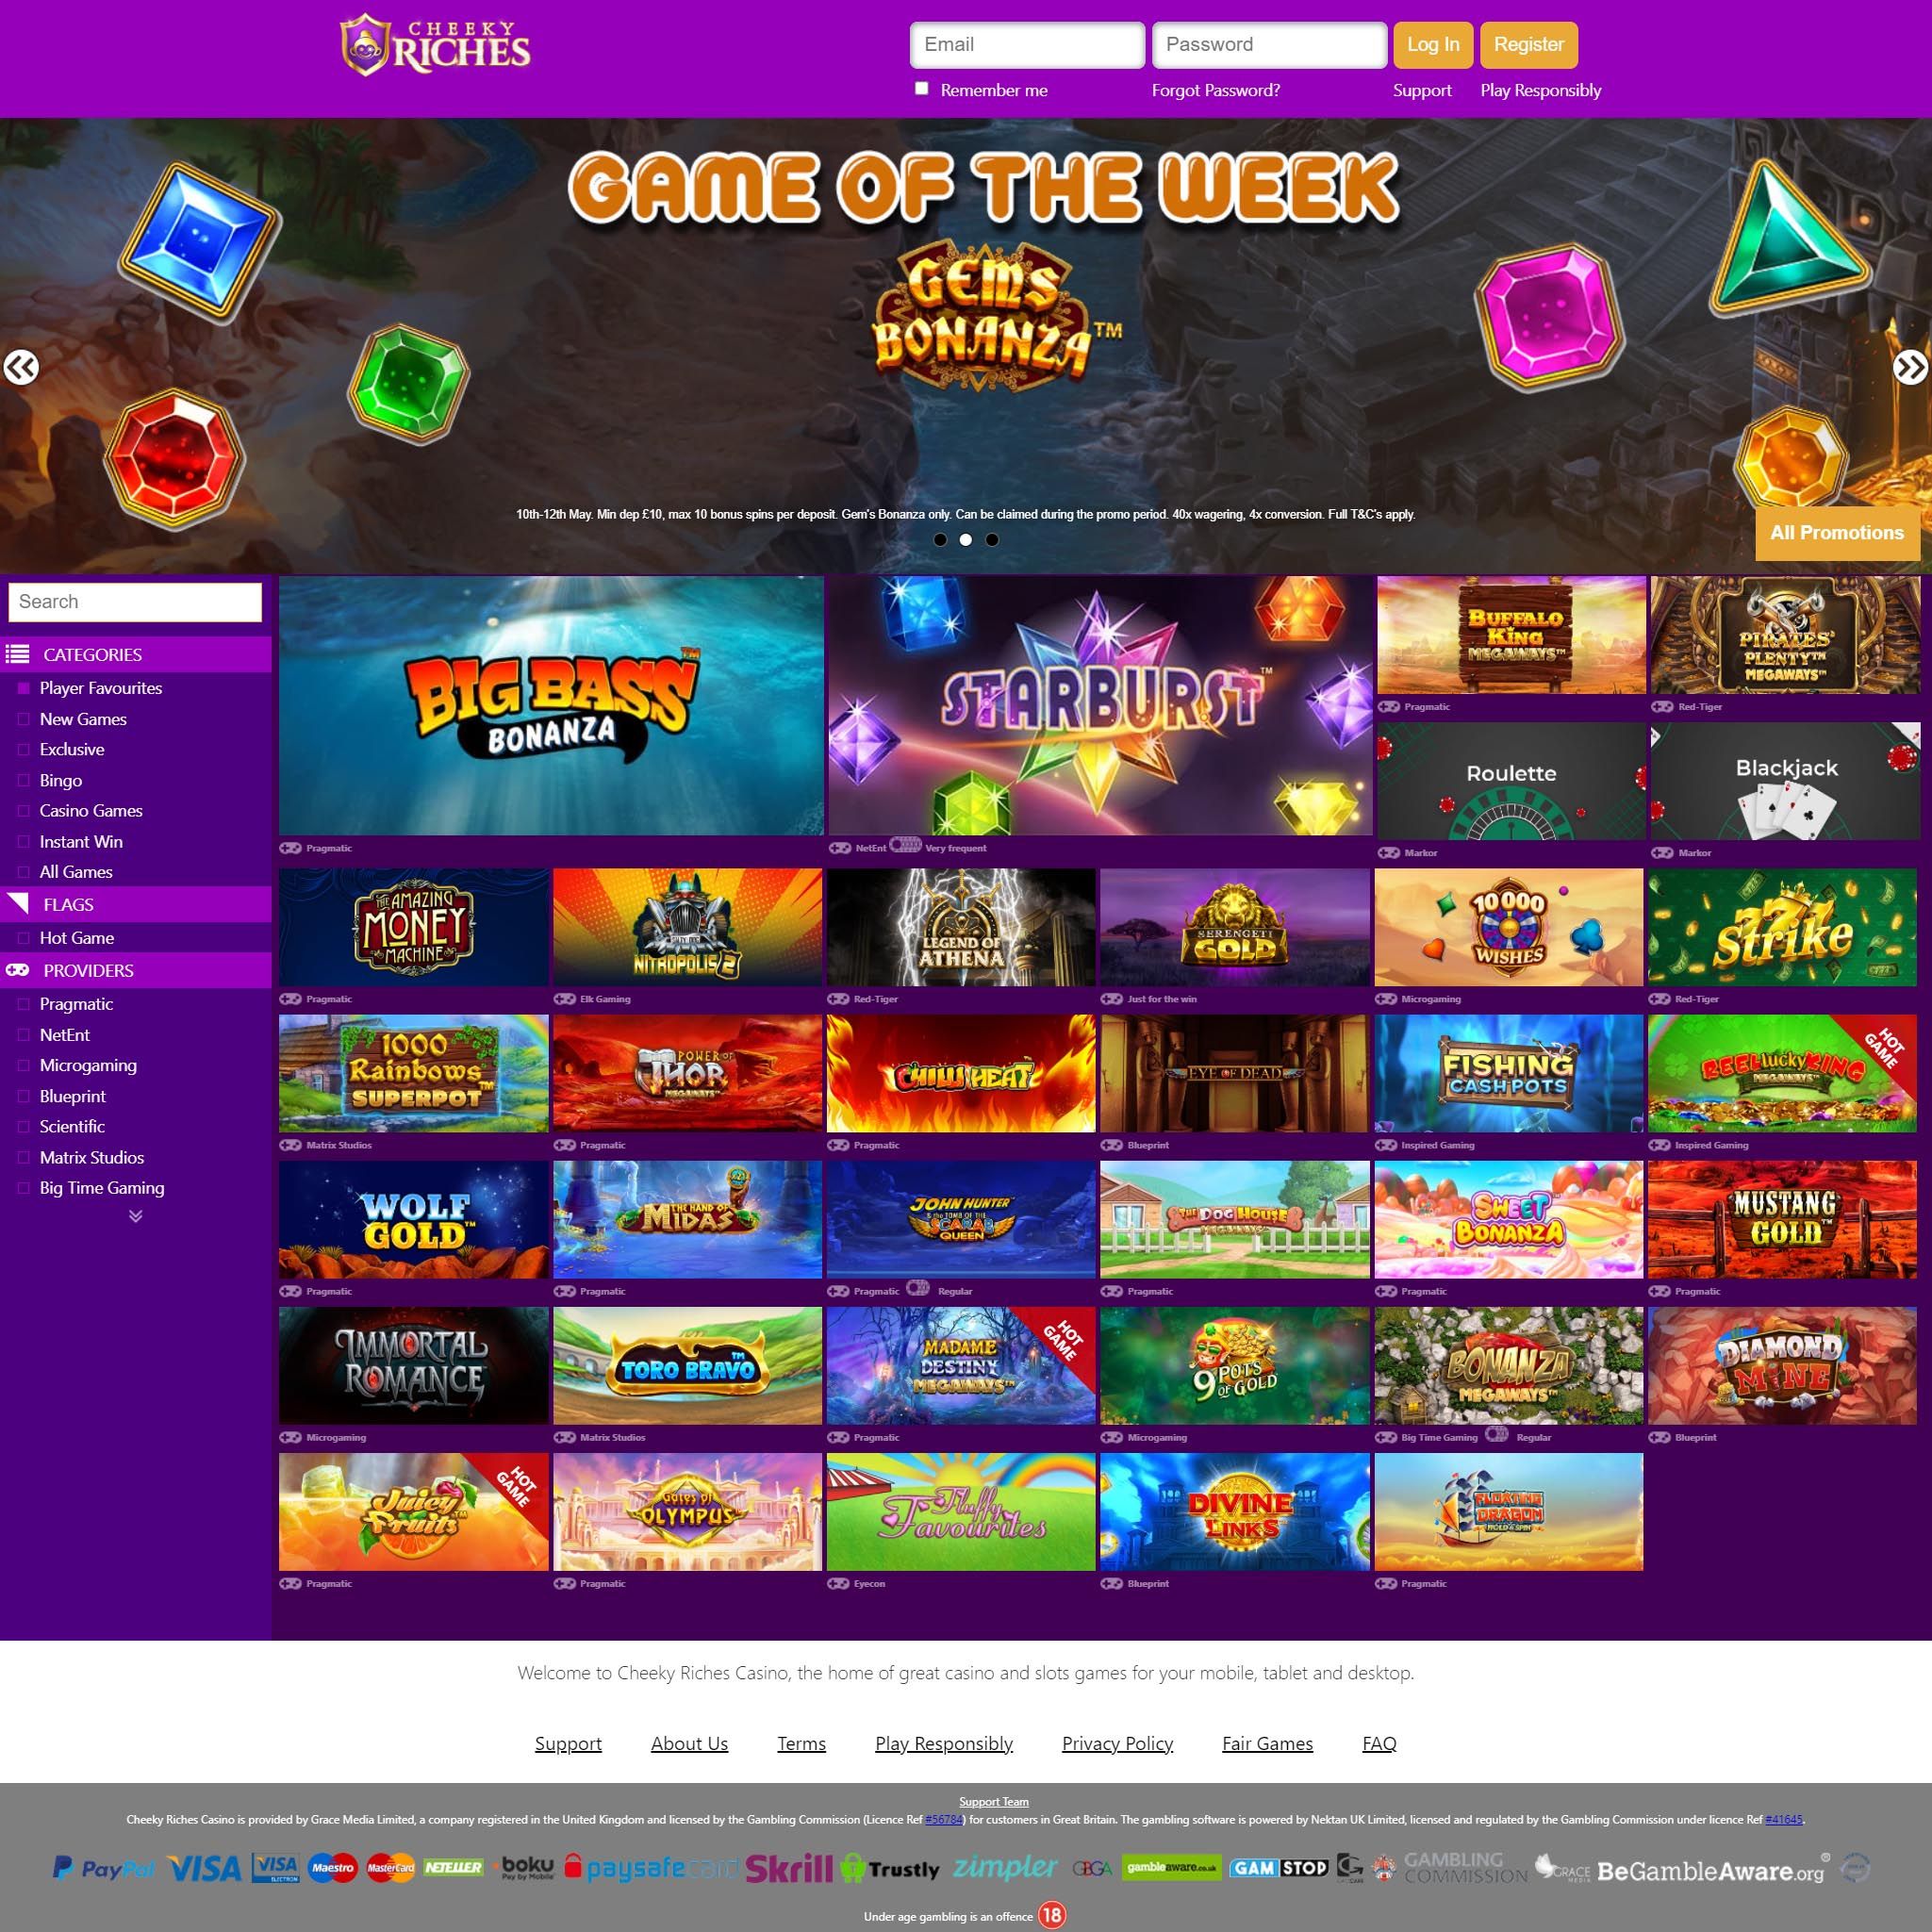 Cheeky Riches Casino review by Mr. Gamble